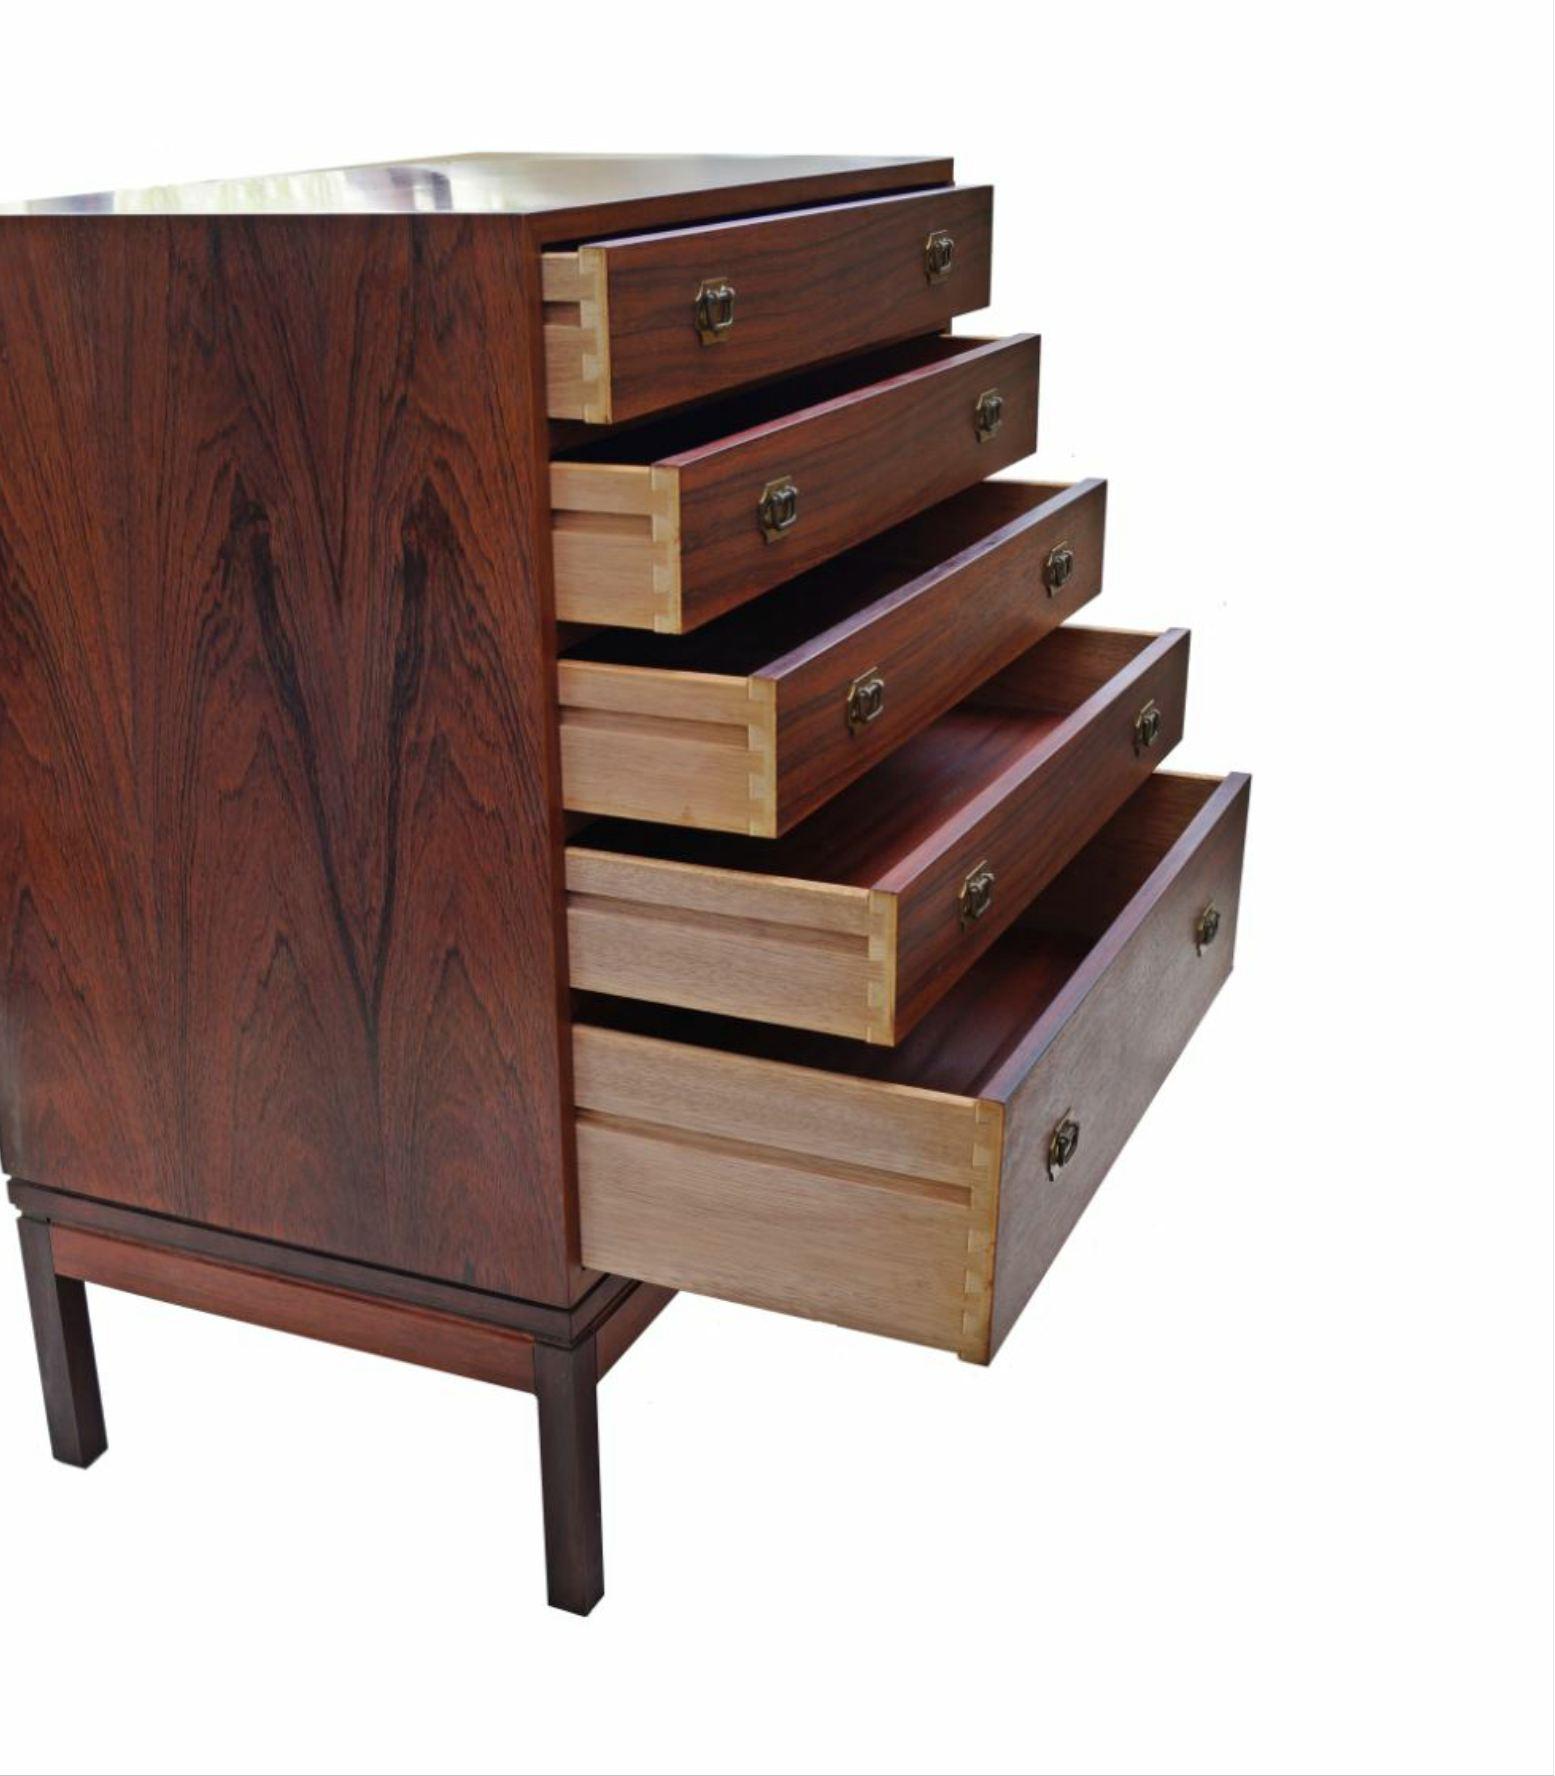 Mid-20th Century Henning Korch Rosewood Danish Modern Jewelry Lingerie Chest Dresser Flat File For Sale